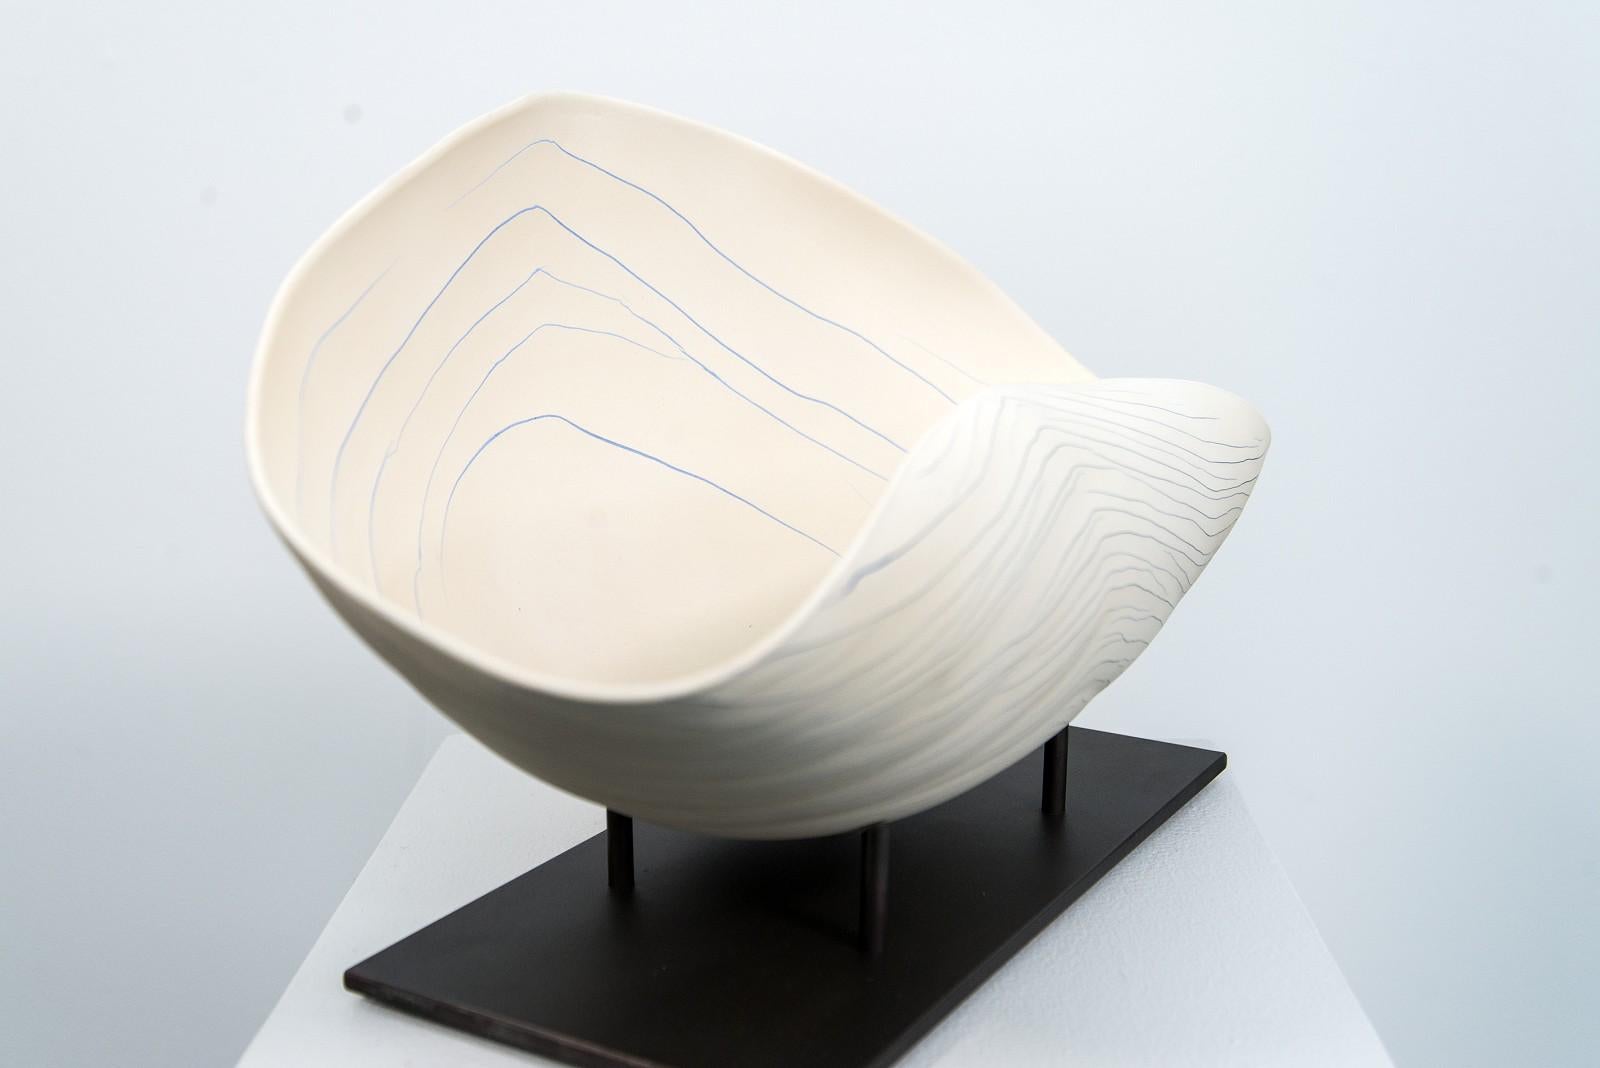 In her Quebec studio, ceramic artist Paula Murray uses her own recipe for porcelain clay that she hand-shapes into intricate pieces and permits the natural drying tensions between her mediums to create unusual abstract shapes. Inspired by forms and